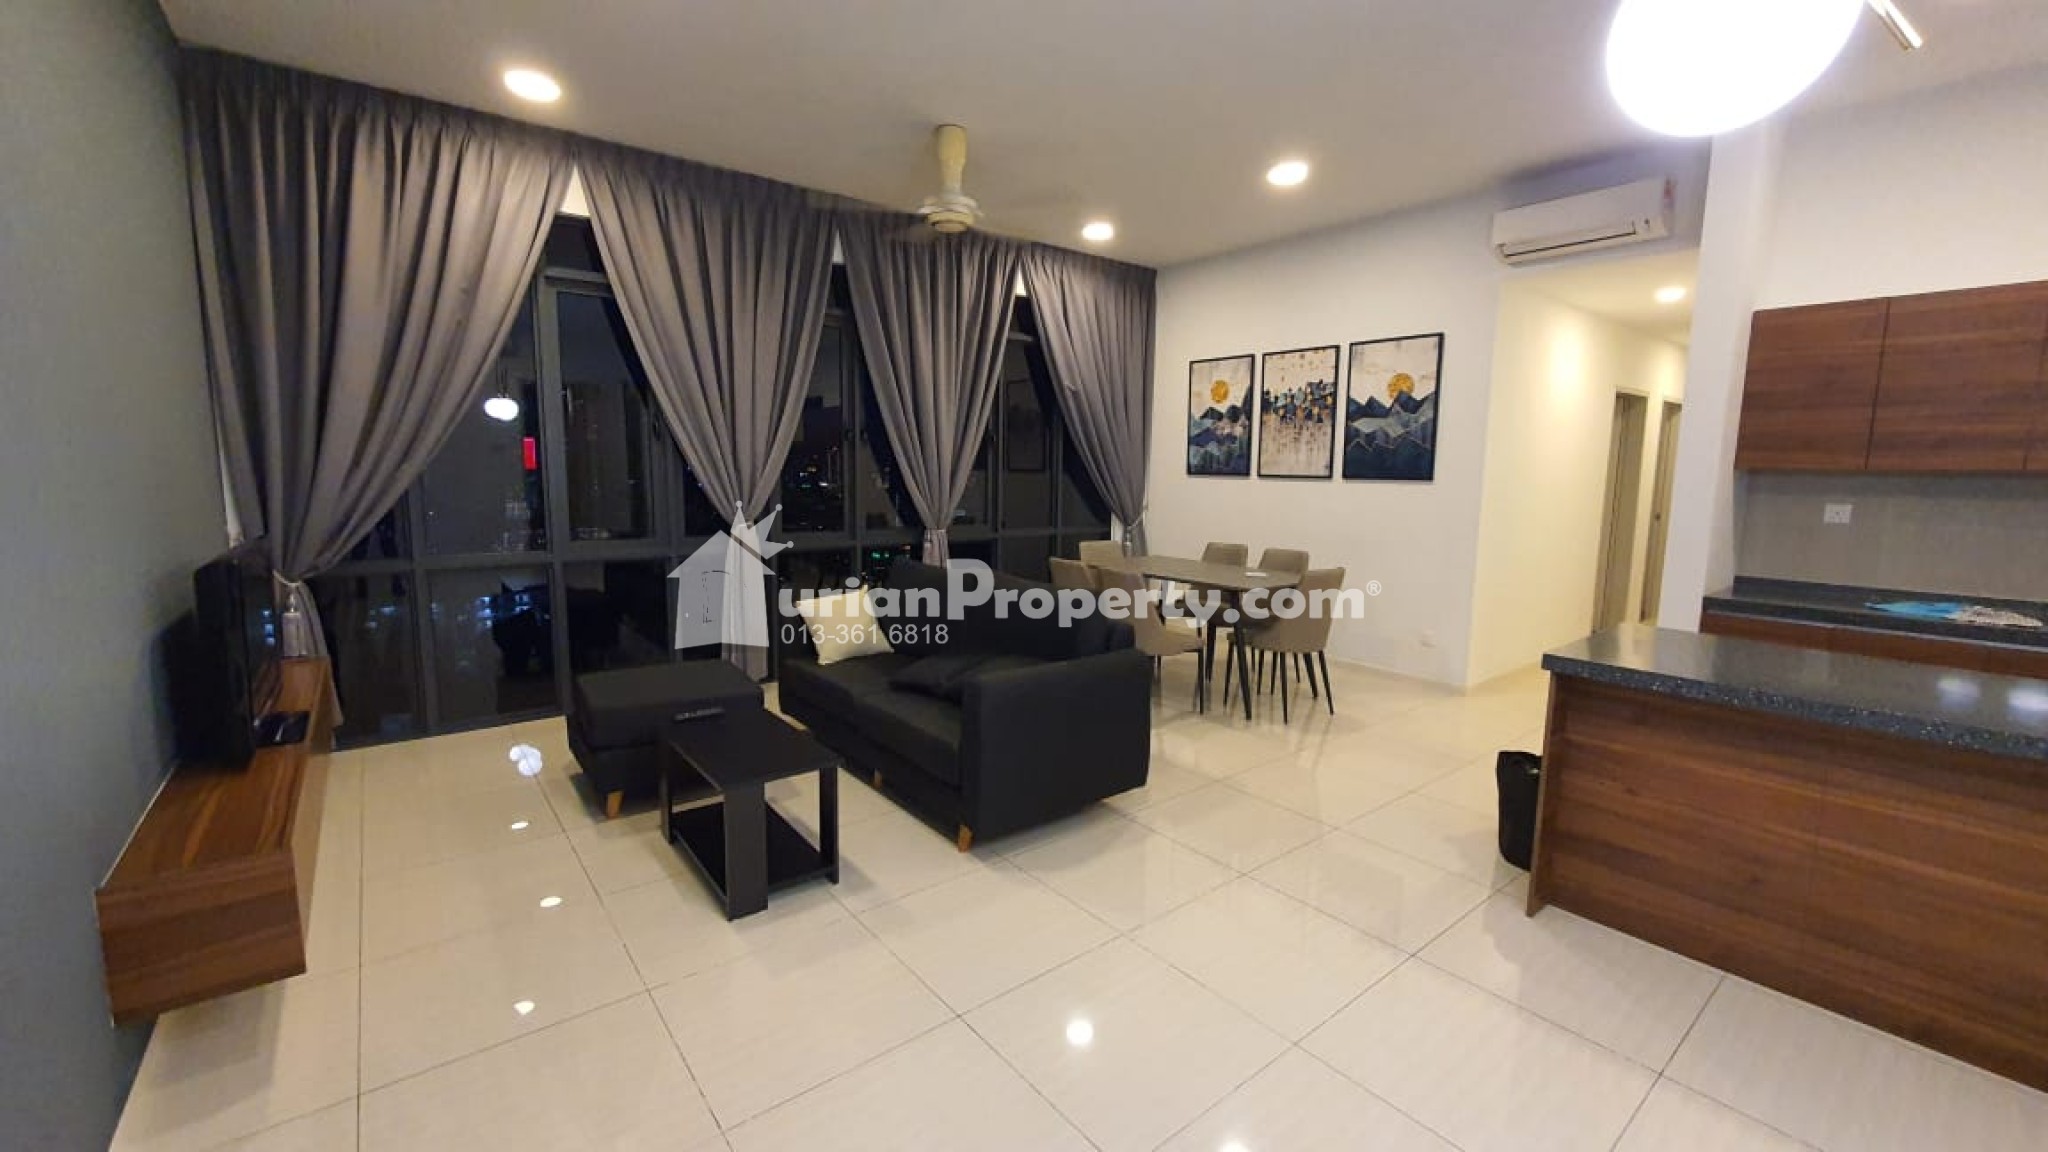 Condo For Sale at Inwood Residences